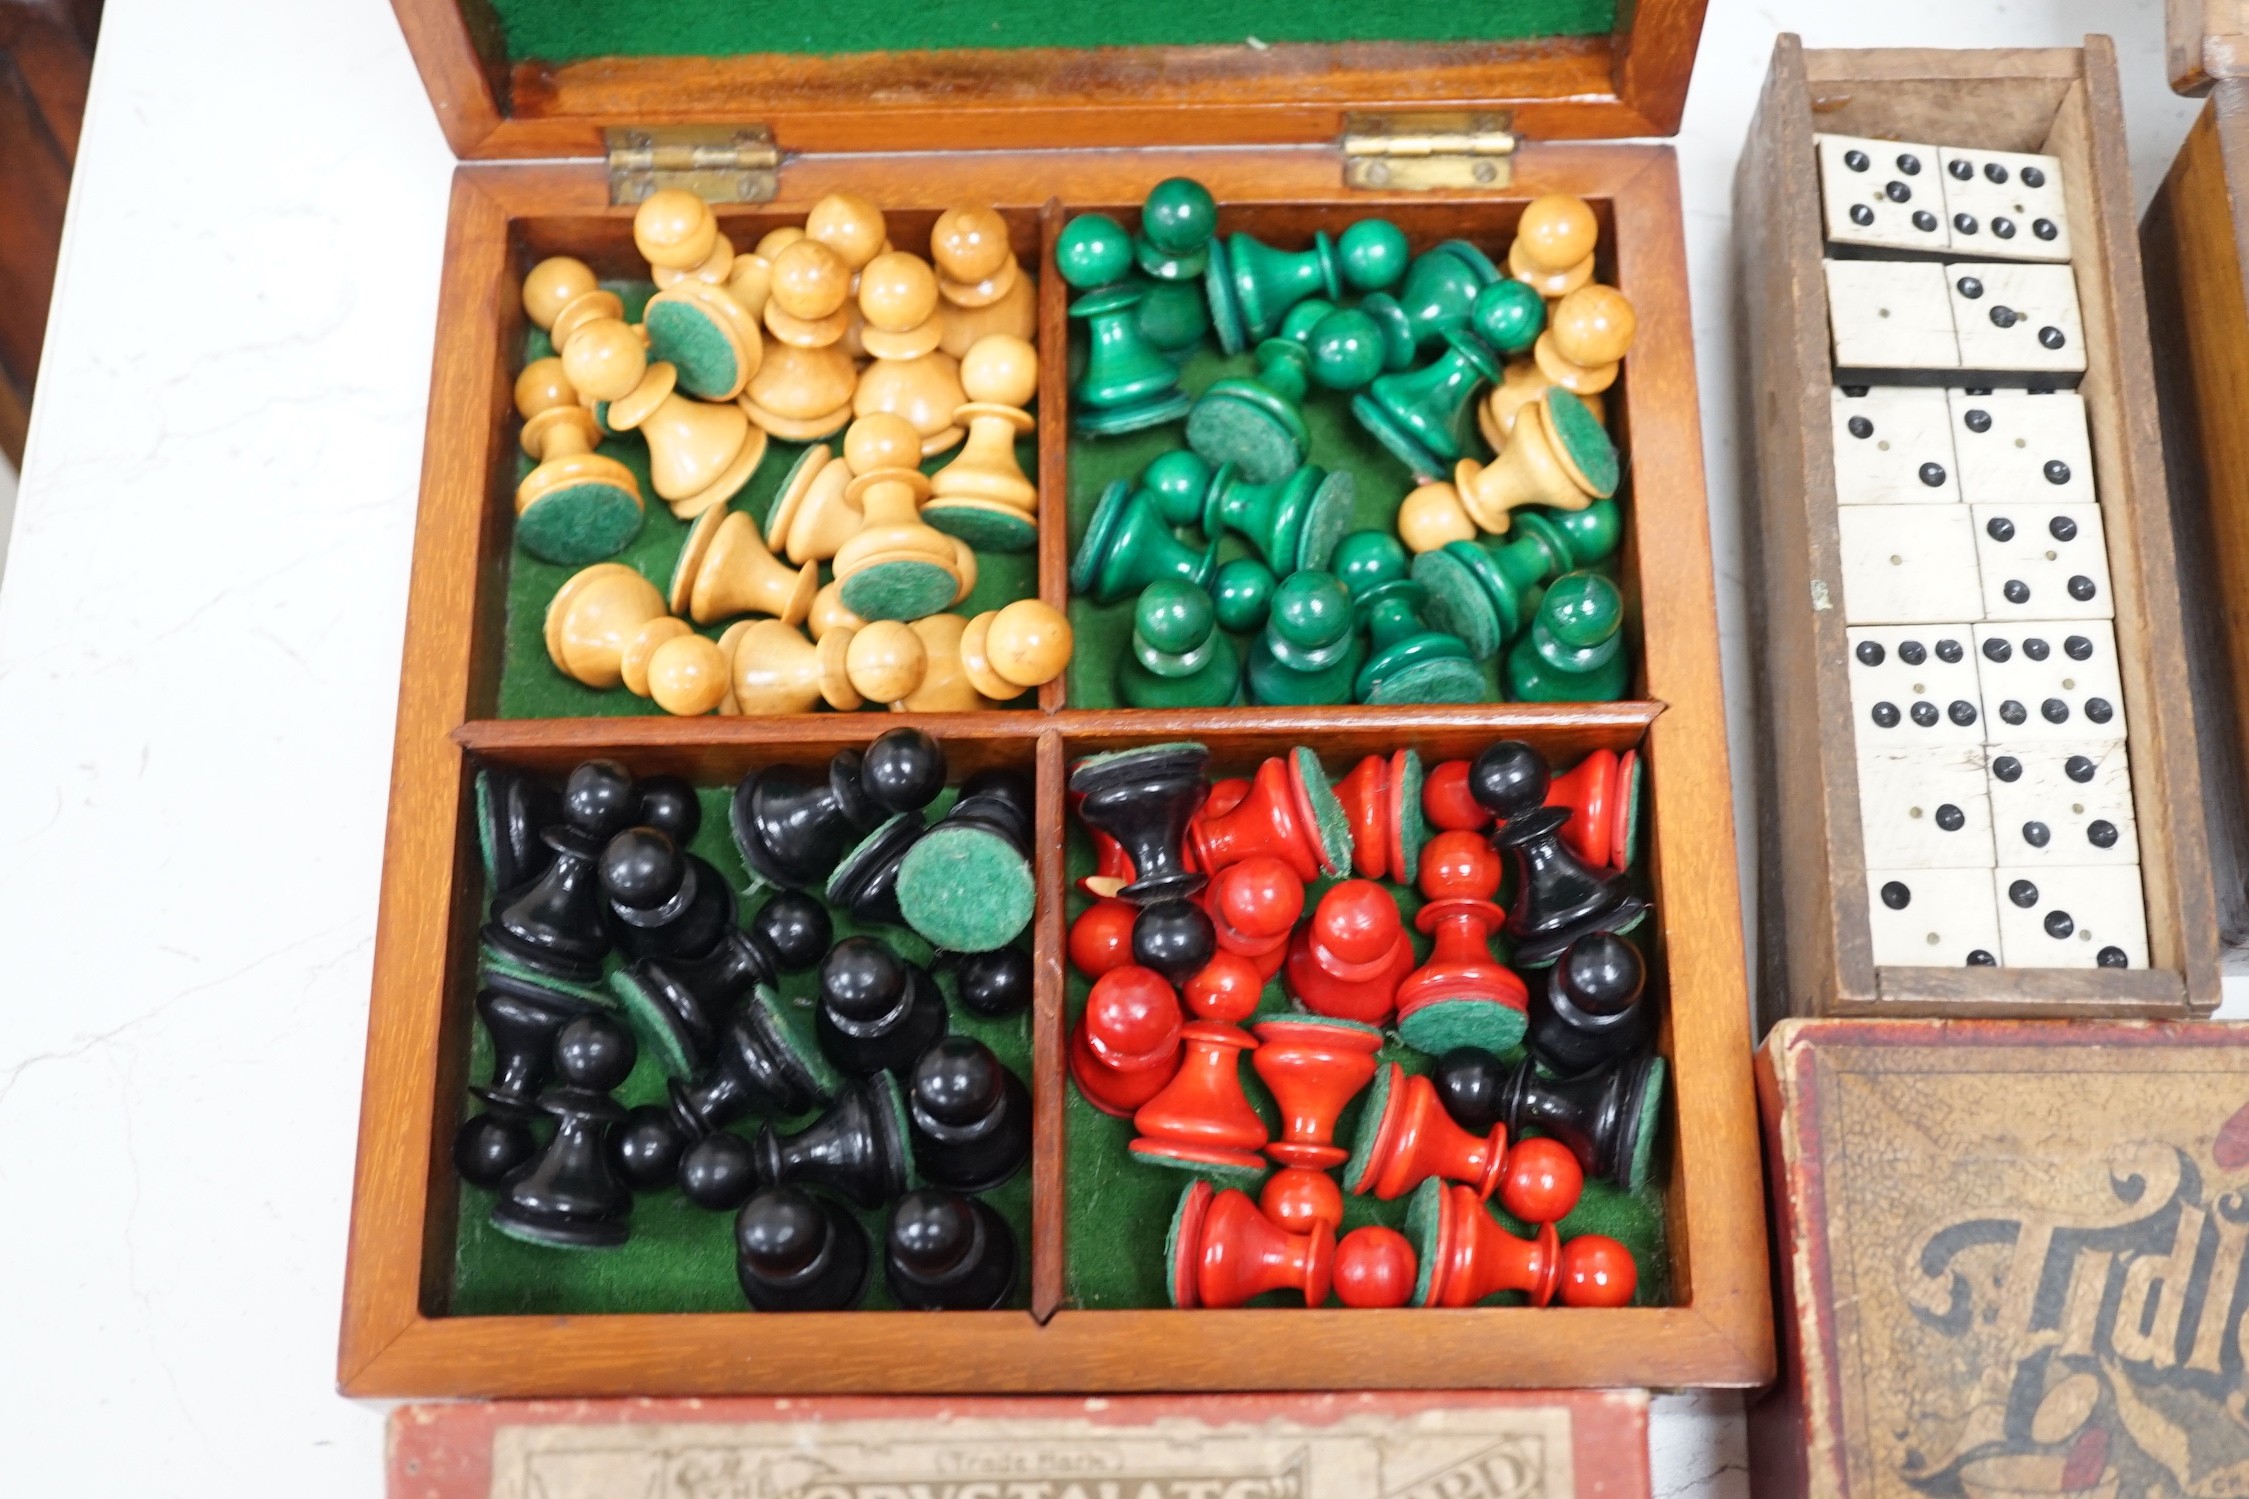 A collection of Victorian and Edwardian games, including Minoru, Revers, Jiggle-Joggle, Magnetic Fish Pond, gig saw puzzles and part chess sets, etc.